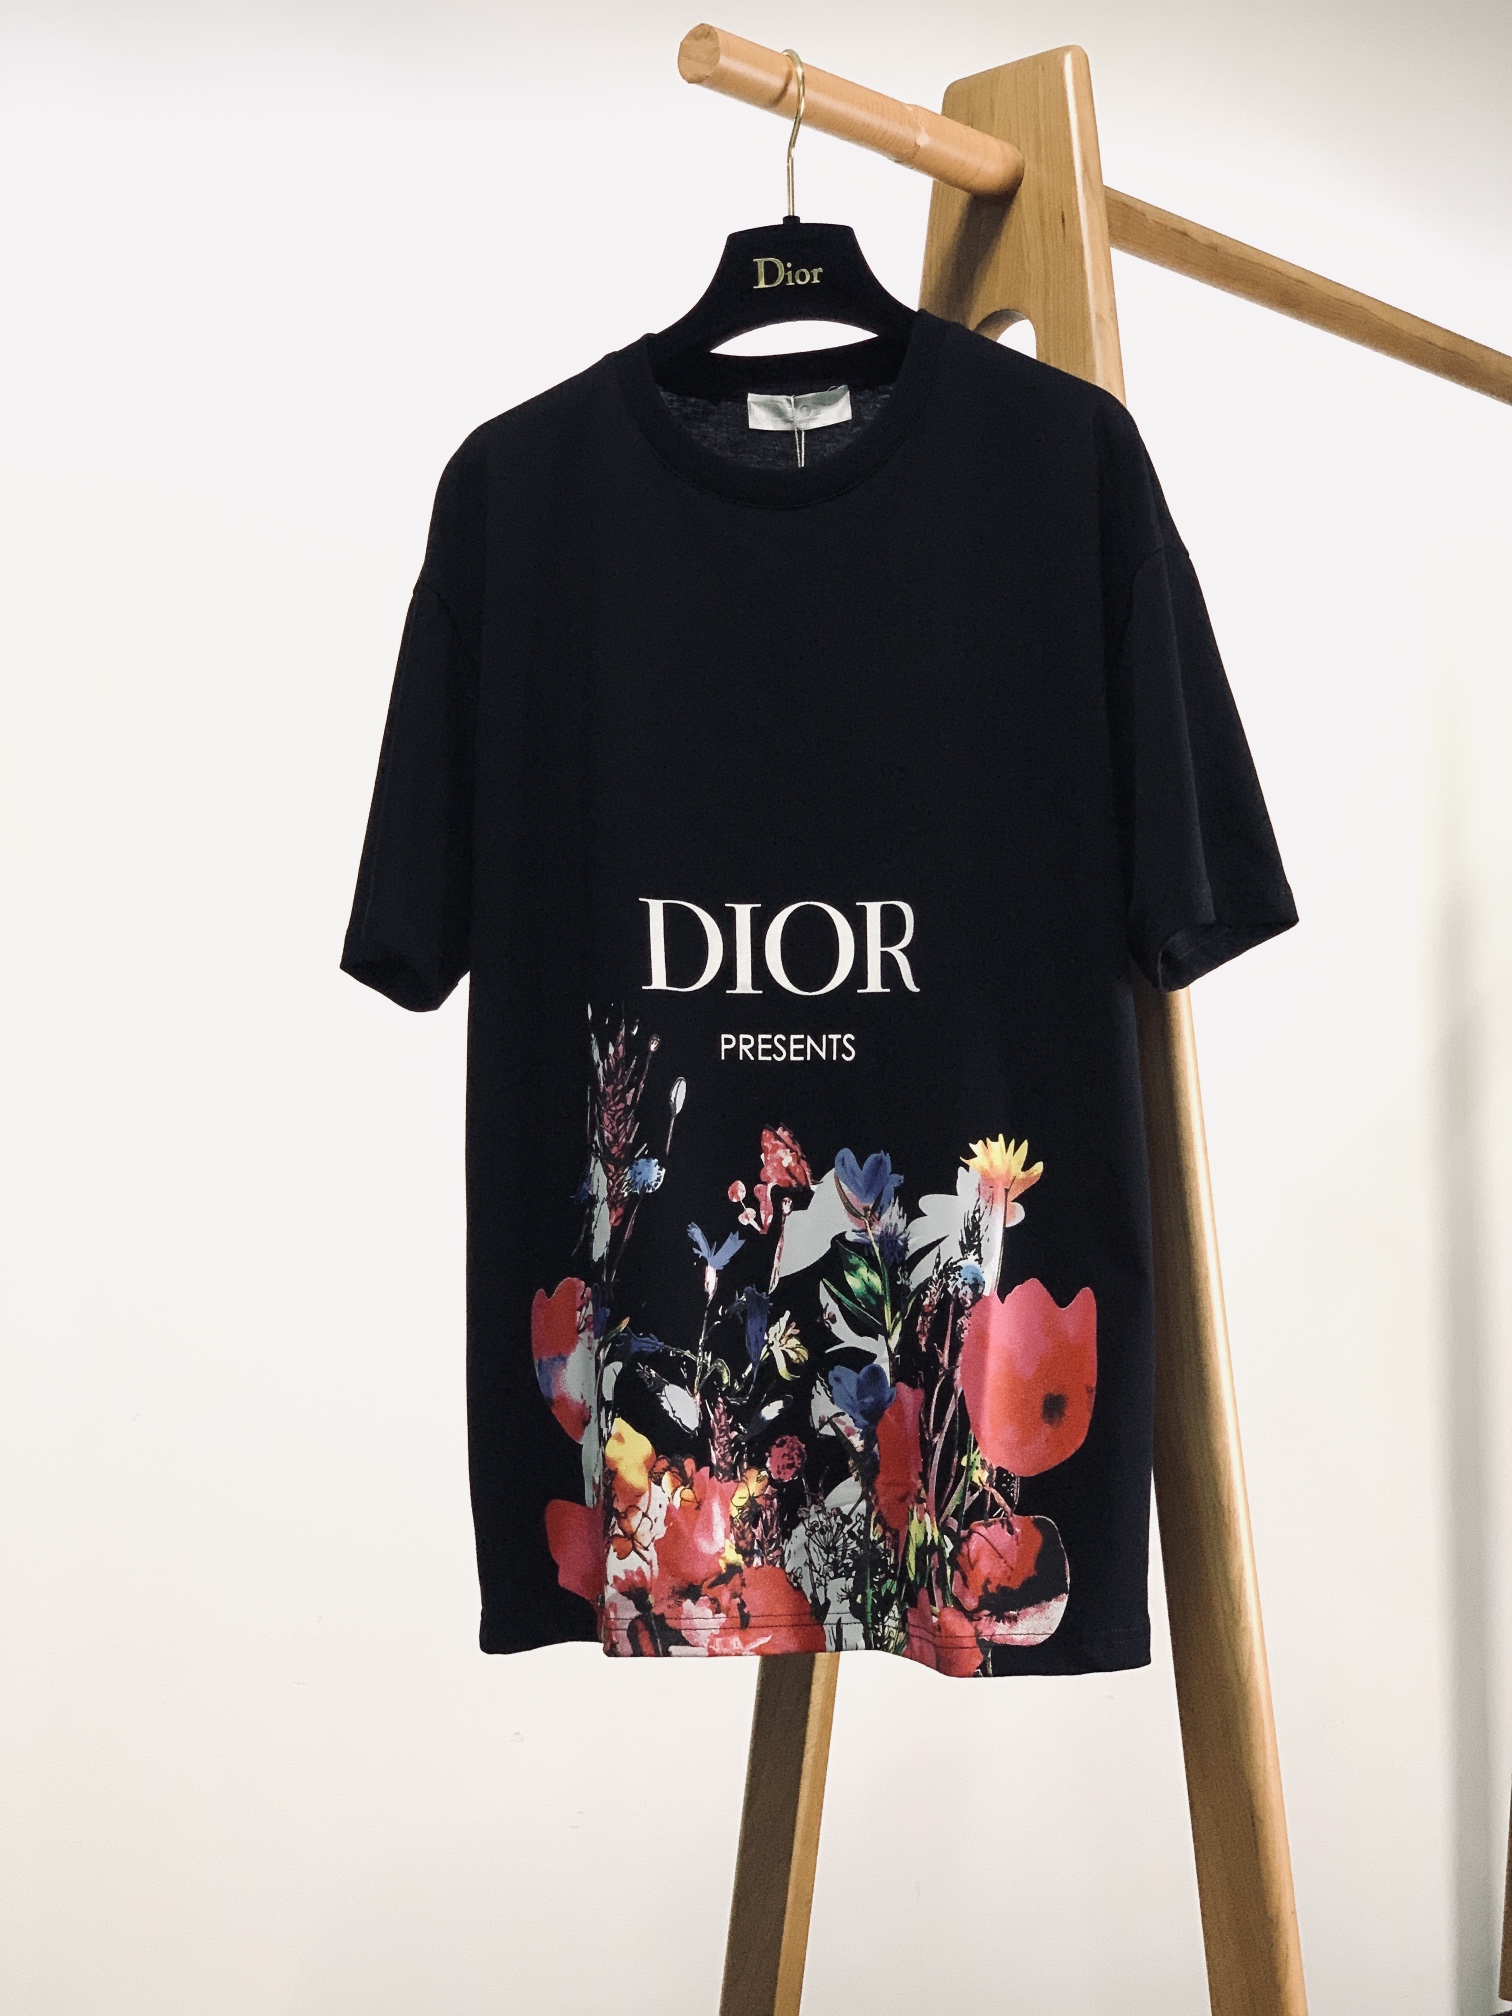 Dior Clothing T-Shirt Printing Unisex Cotton Spring/Summer Collection